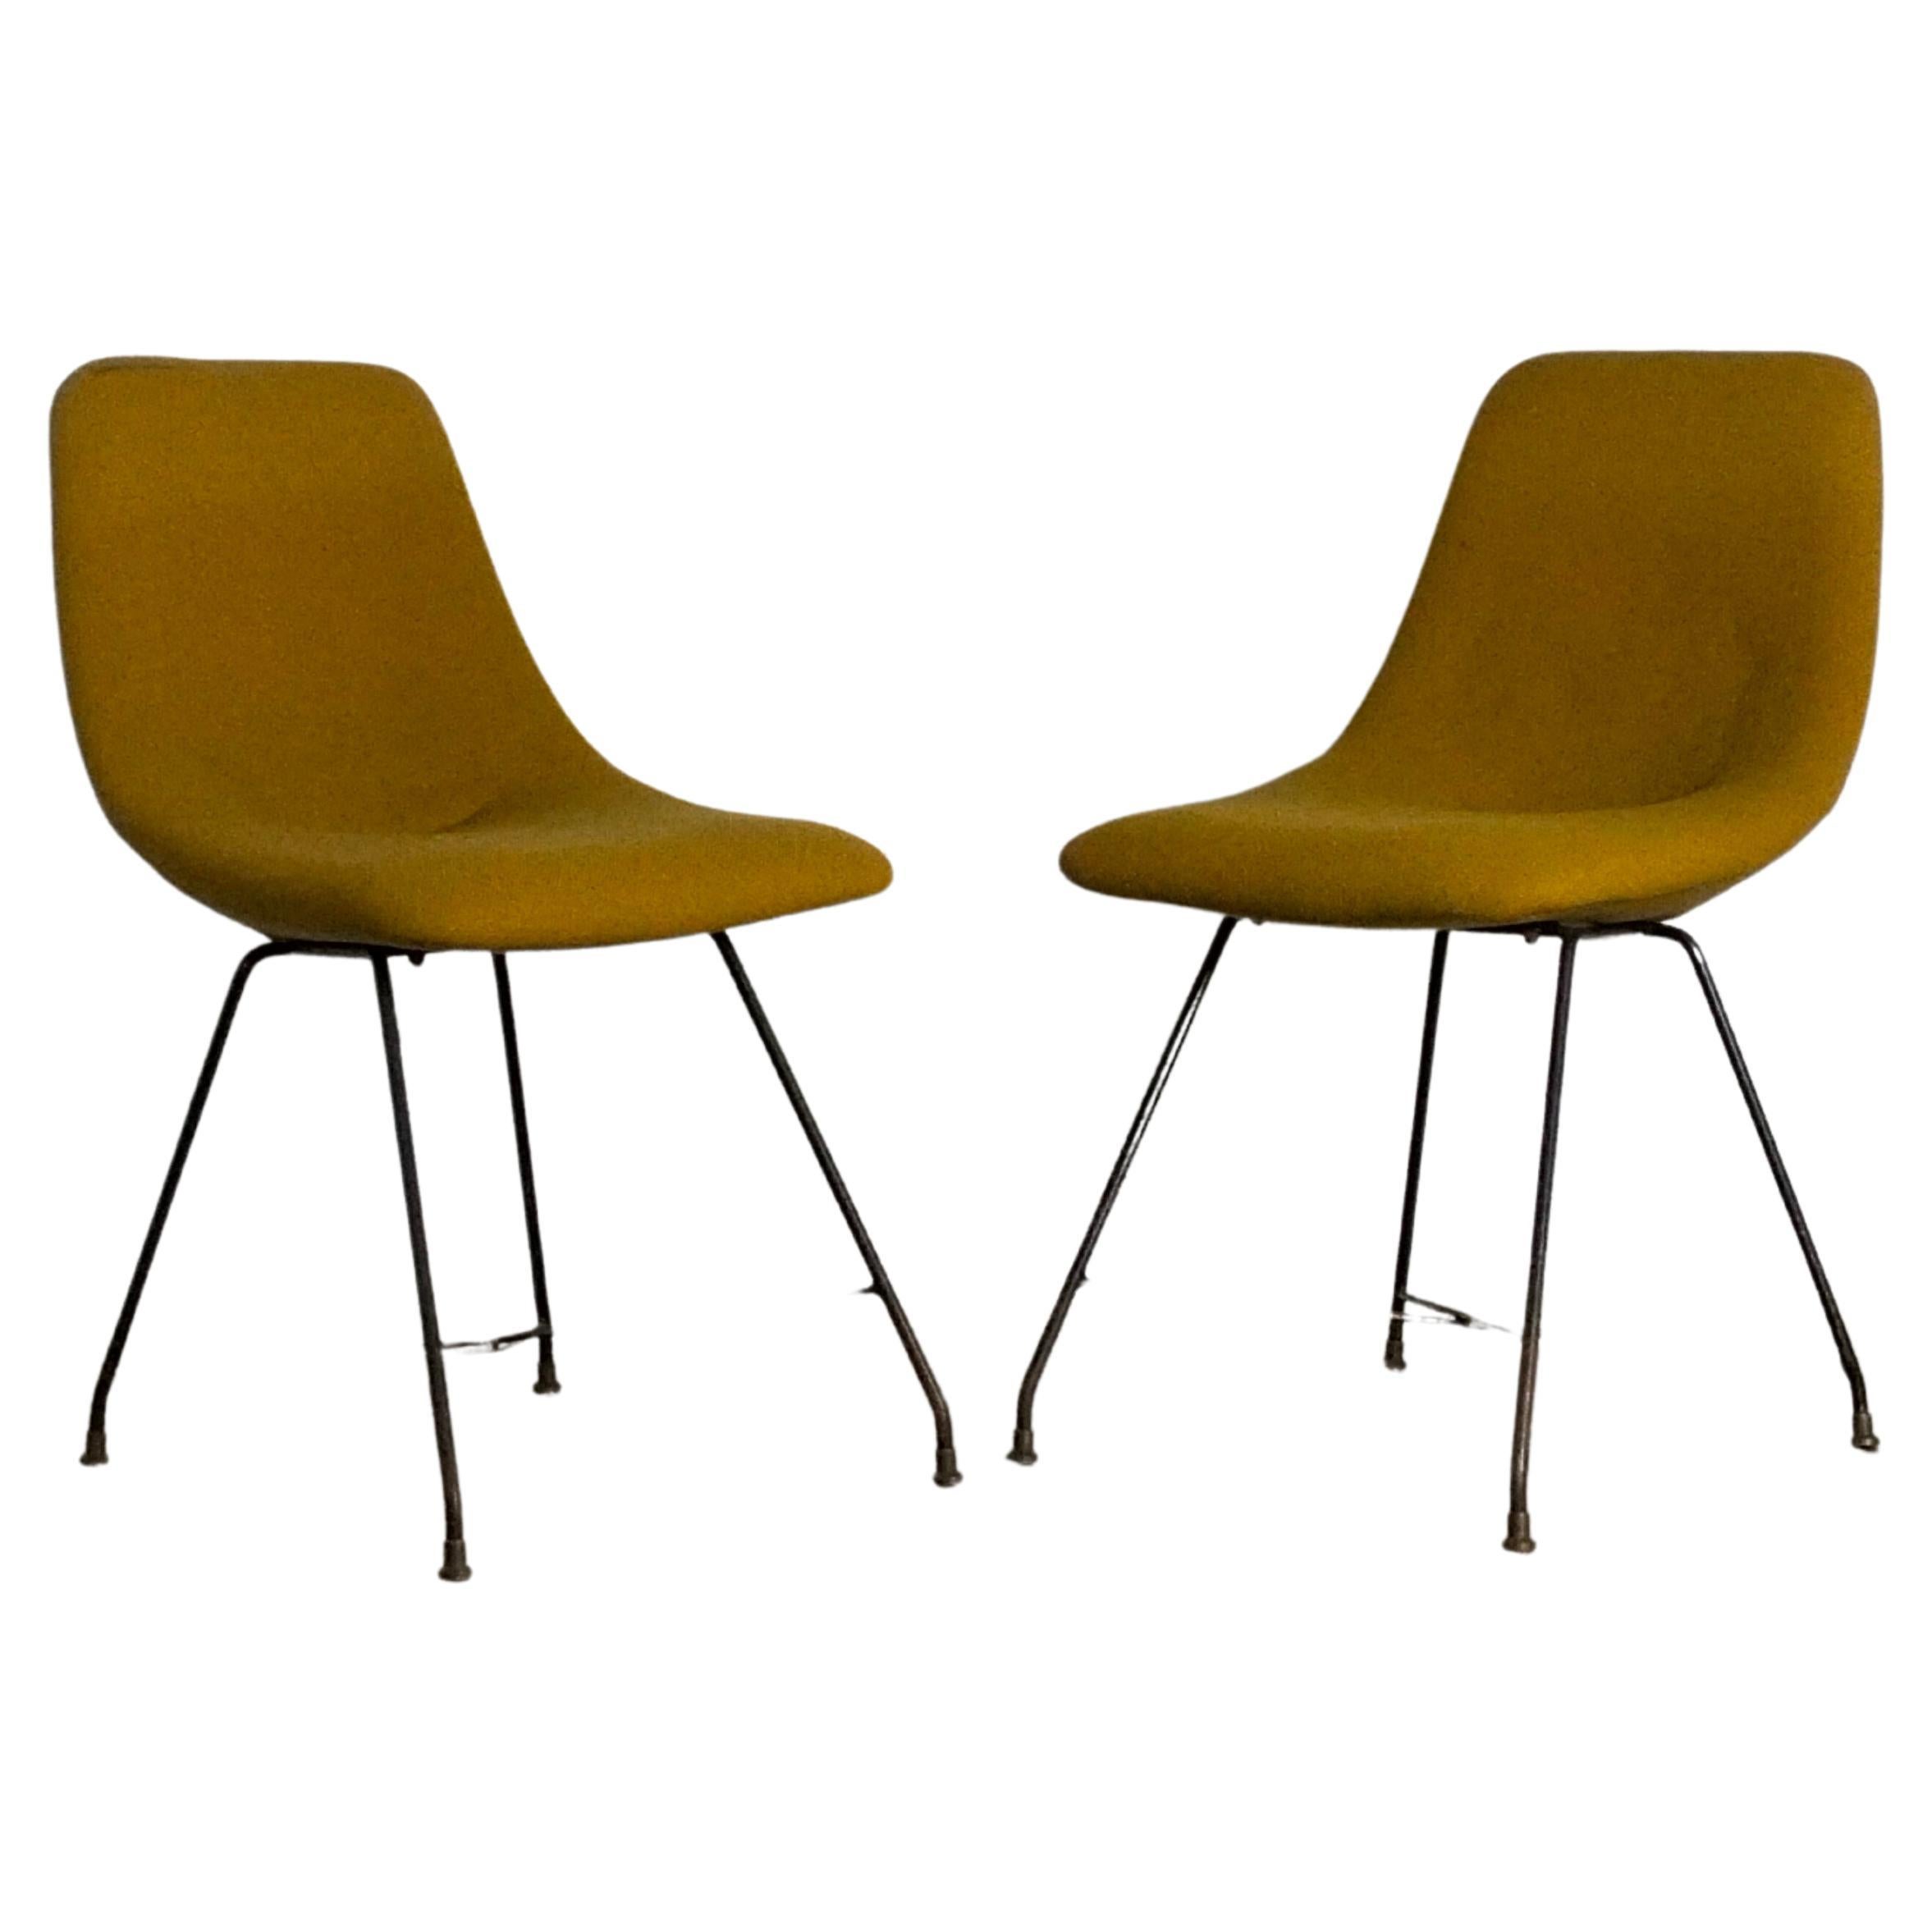 Set of 2 Aster Chairs by Augusto Bozzi for Saporiti, ‘50'60